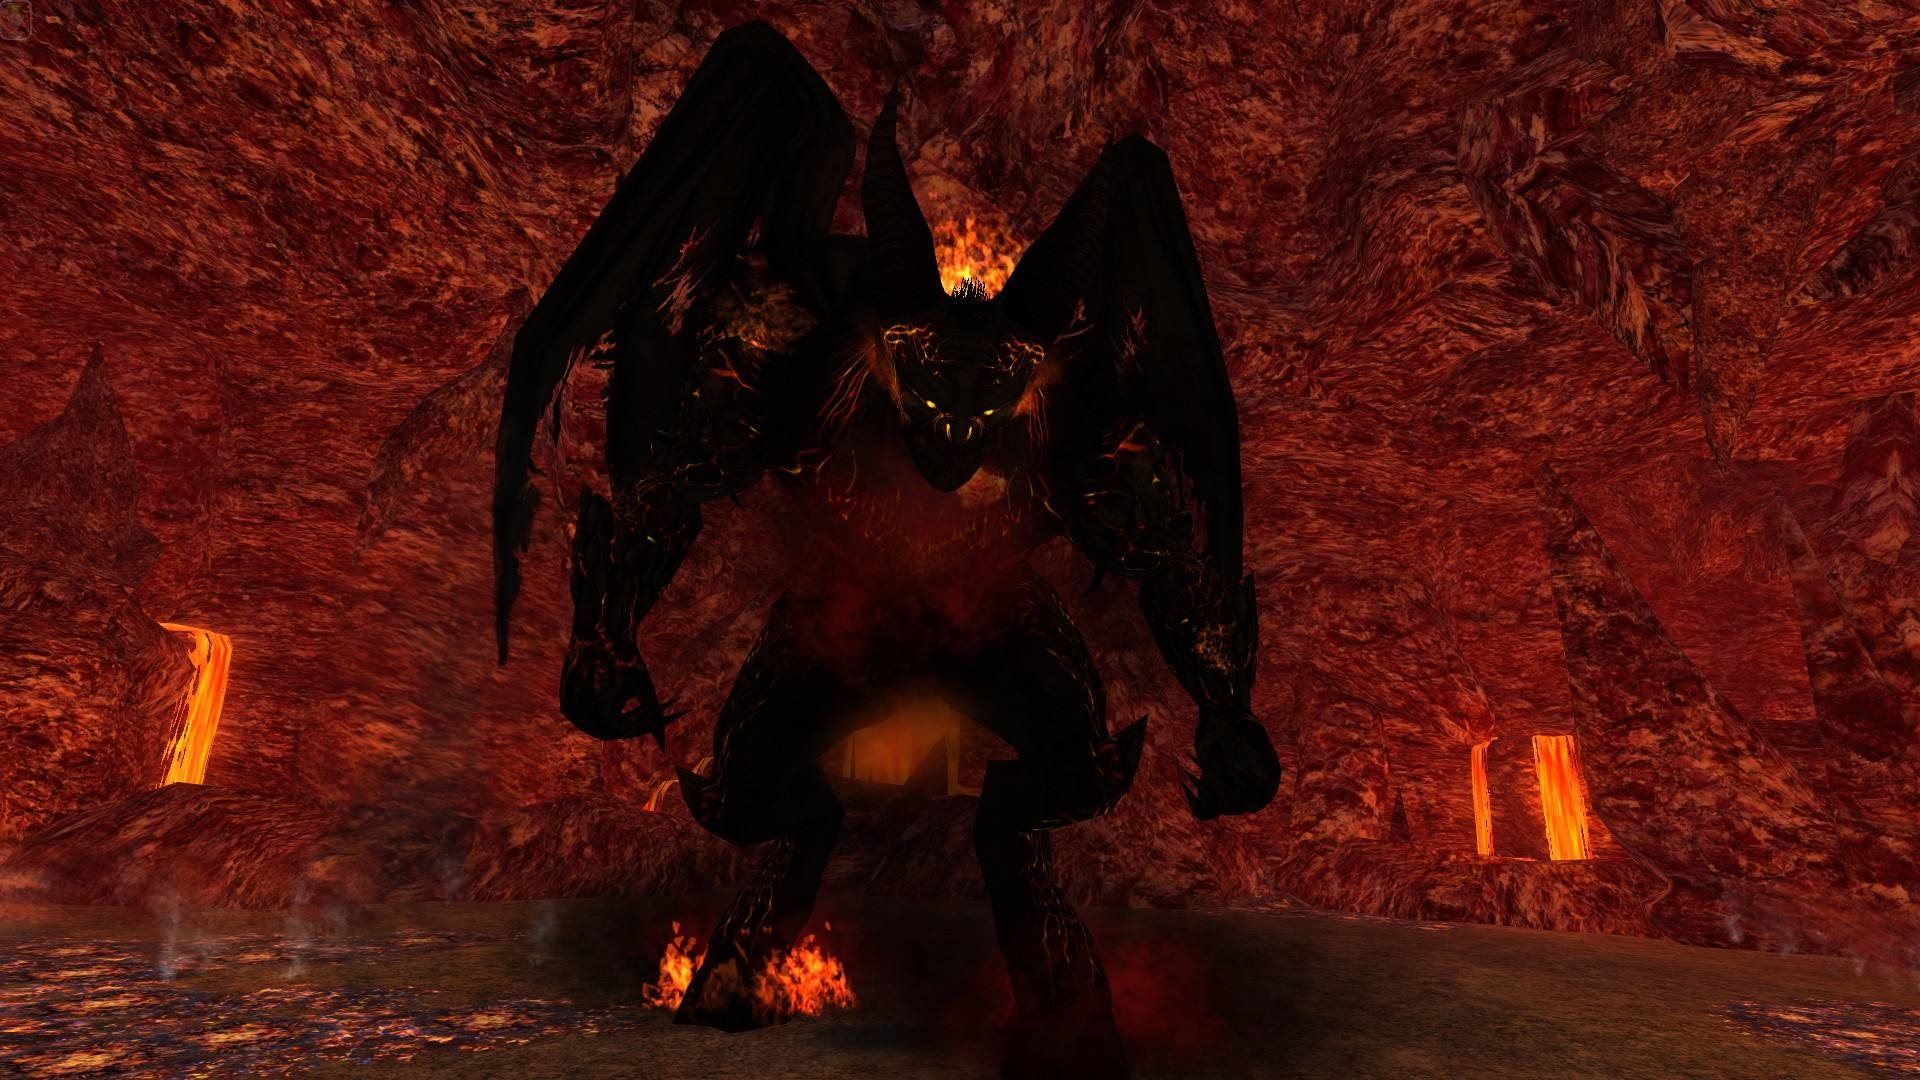 1920x1080 ... The Lord of the rings Online - Balrog of Morgoth by BaronDeConde